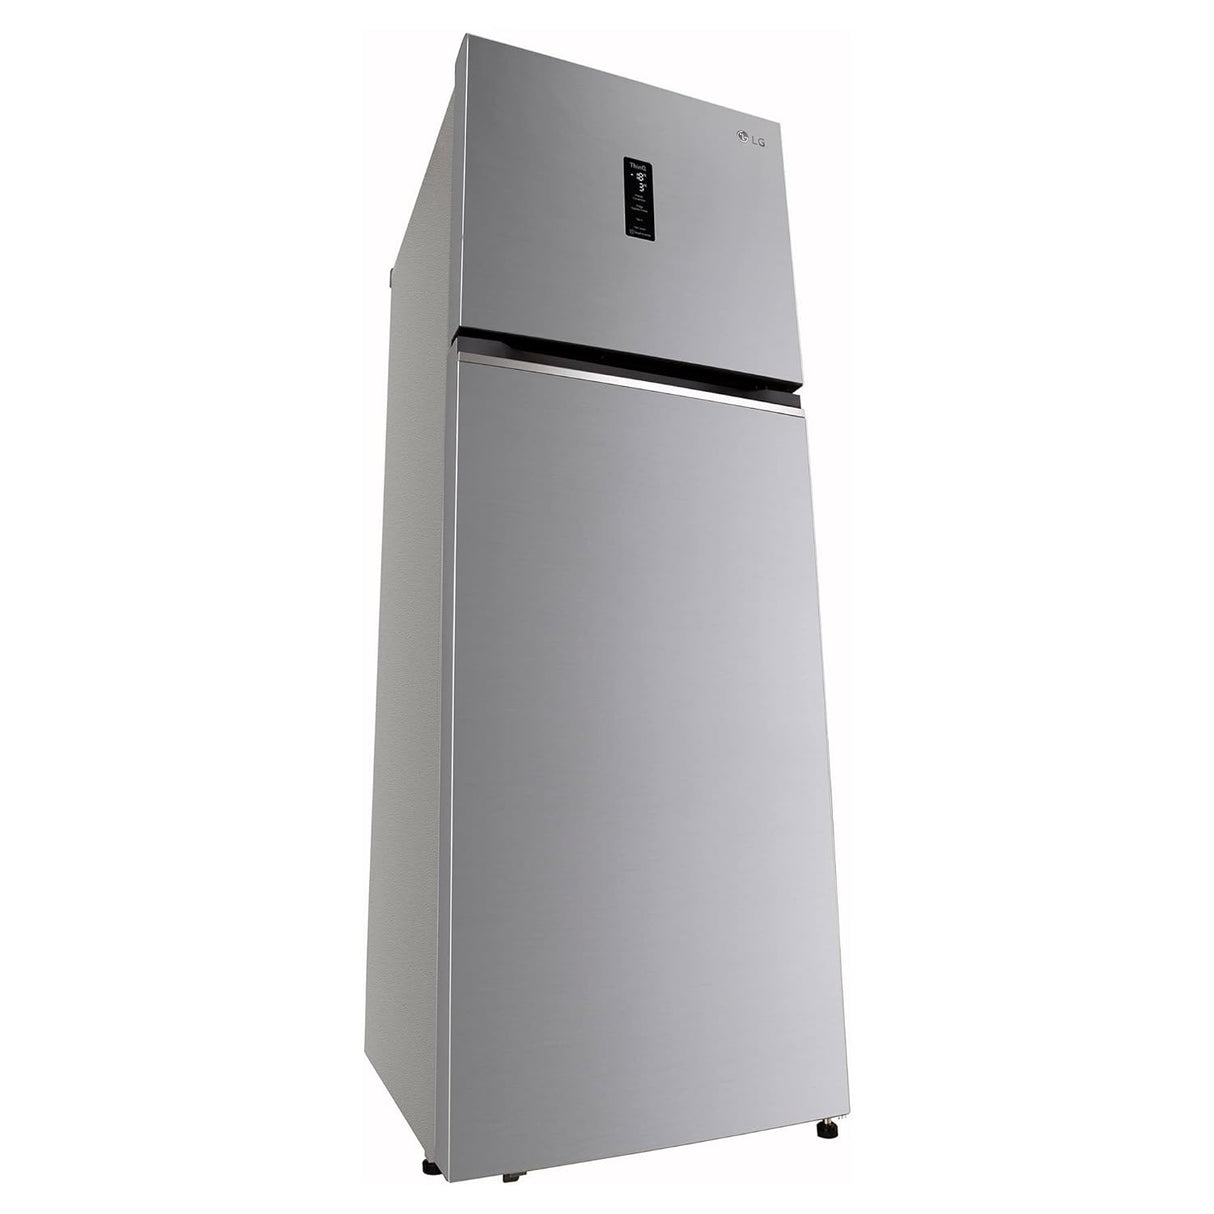 LG 322 L 2 Star Frost-Free Smart Inverter Wi-Fi Double Door Refrigerator Appliance (2023 Model,  Shiny Steel, Convertible & Door Cooling+ GL-T342TPZY,